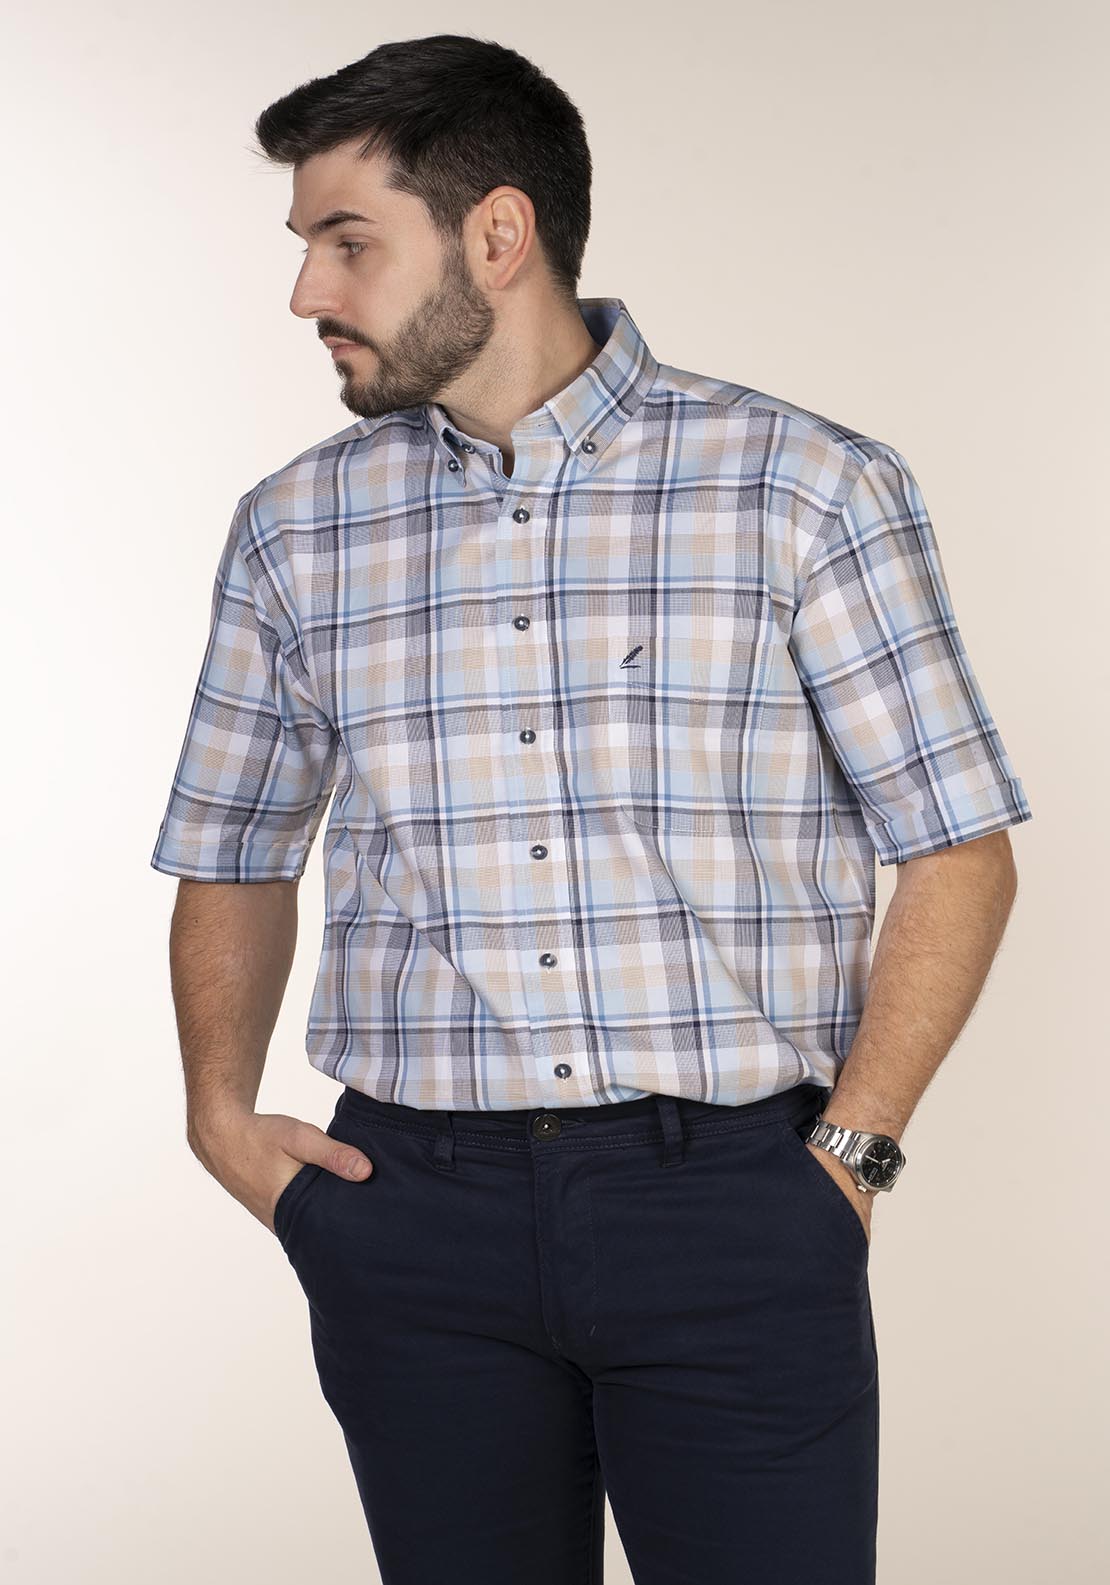 Yeats Casual Check Short Sleeve Shirt - Blue 2 Shaws Department Stores